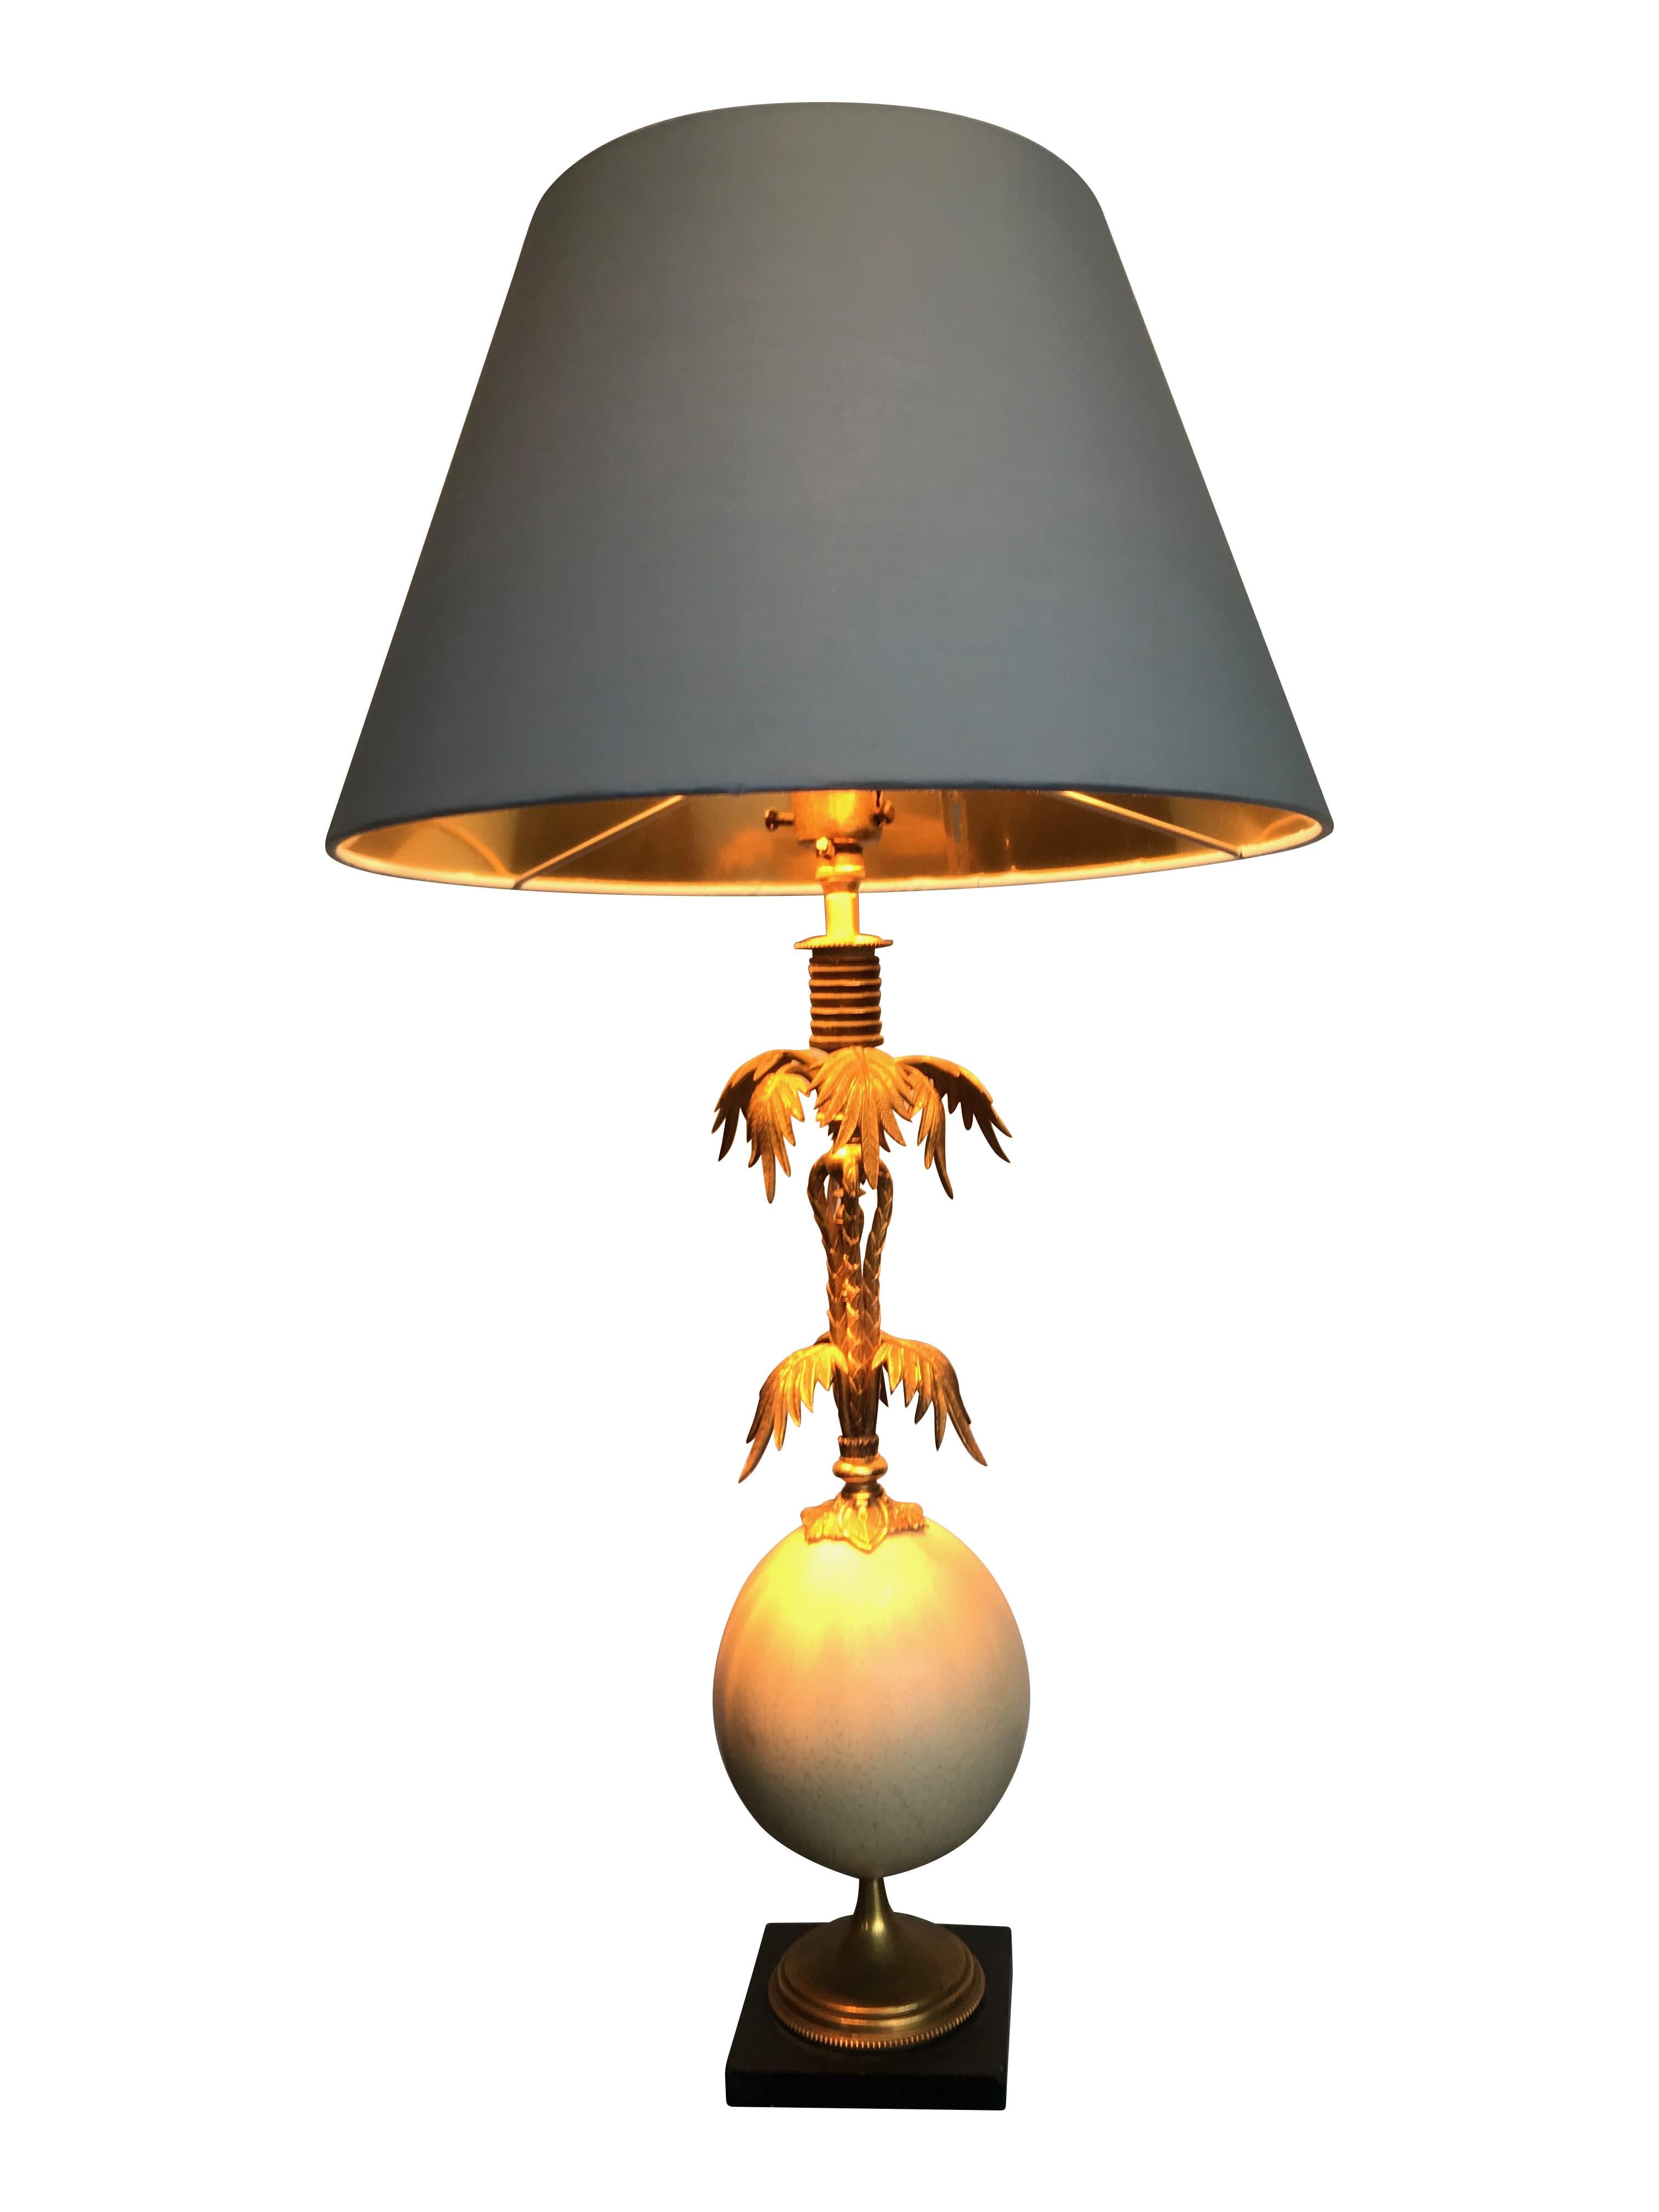 A brass palm tree table lamp with real ostrich egg centre mounted on a black slate base. With new bespoke ivory colored shade with gold lining.